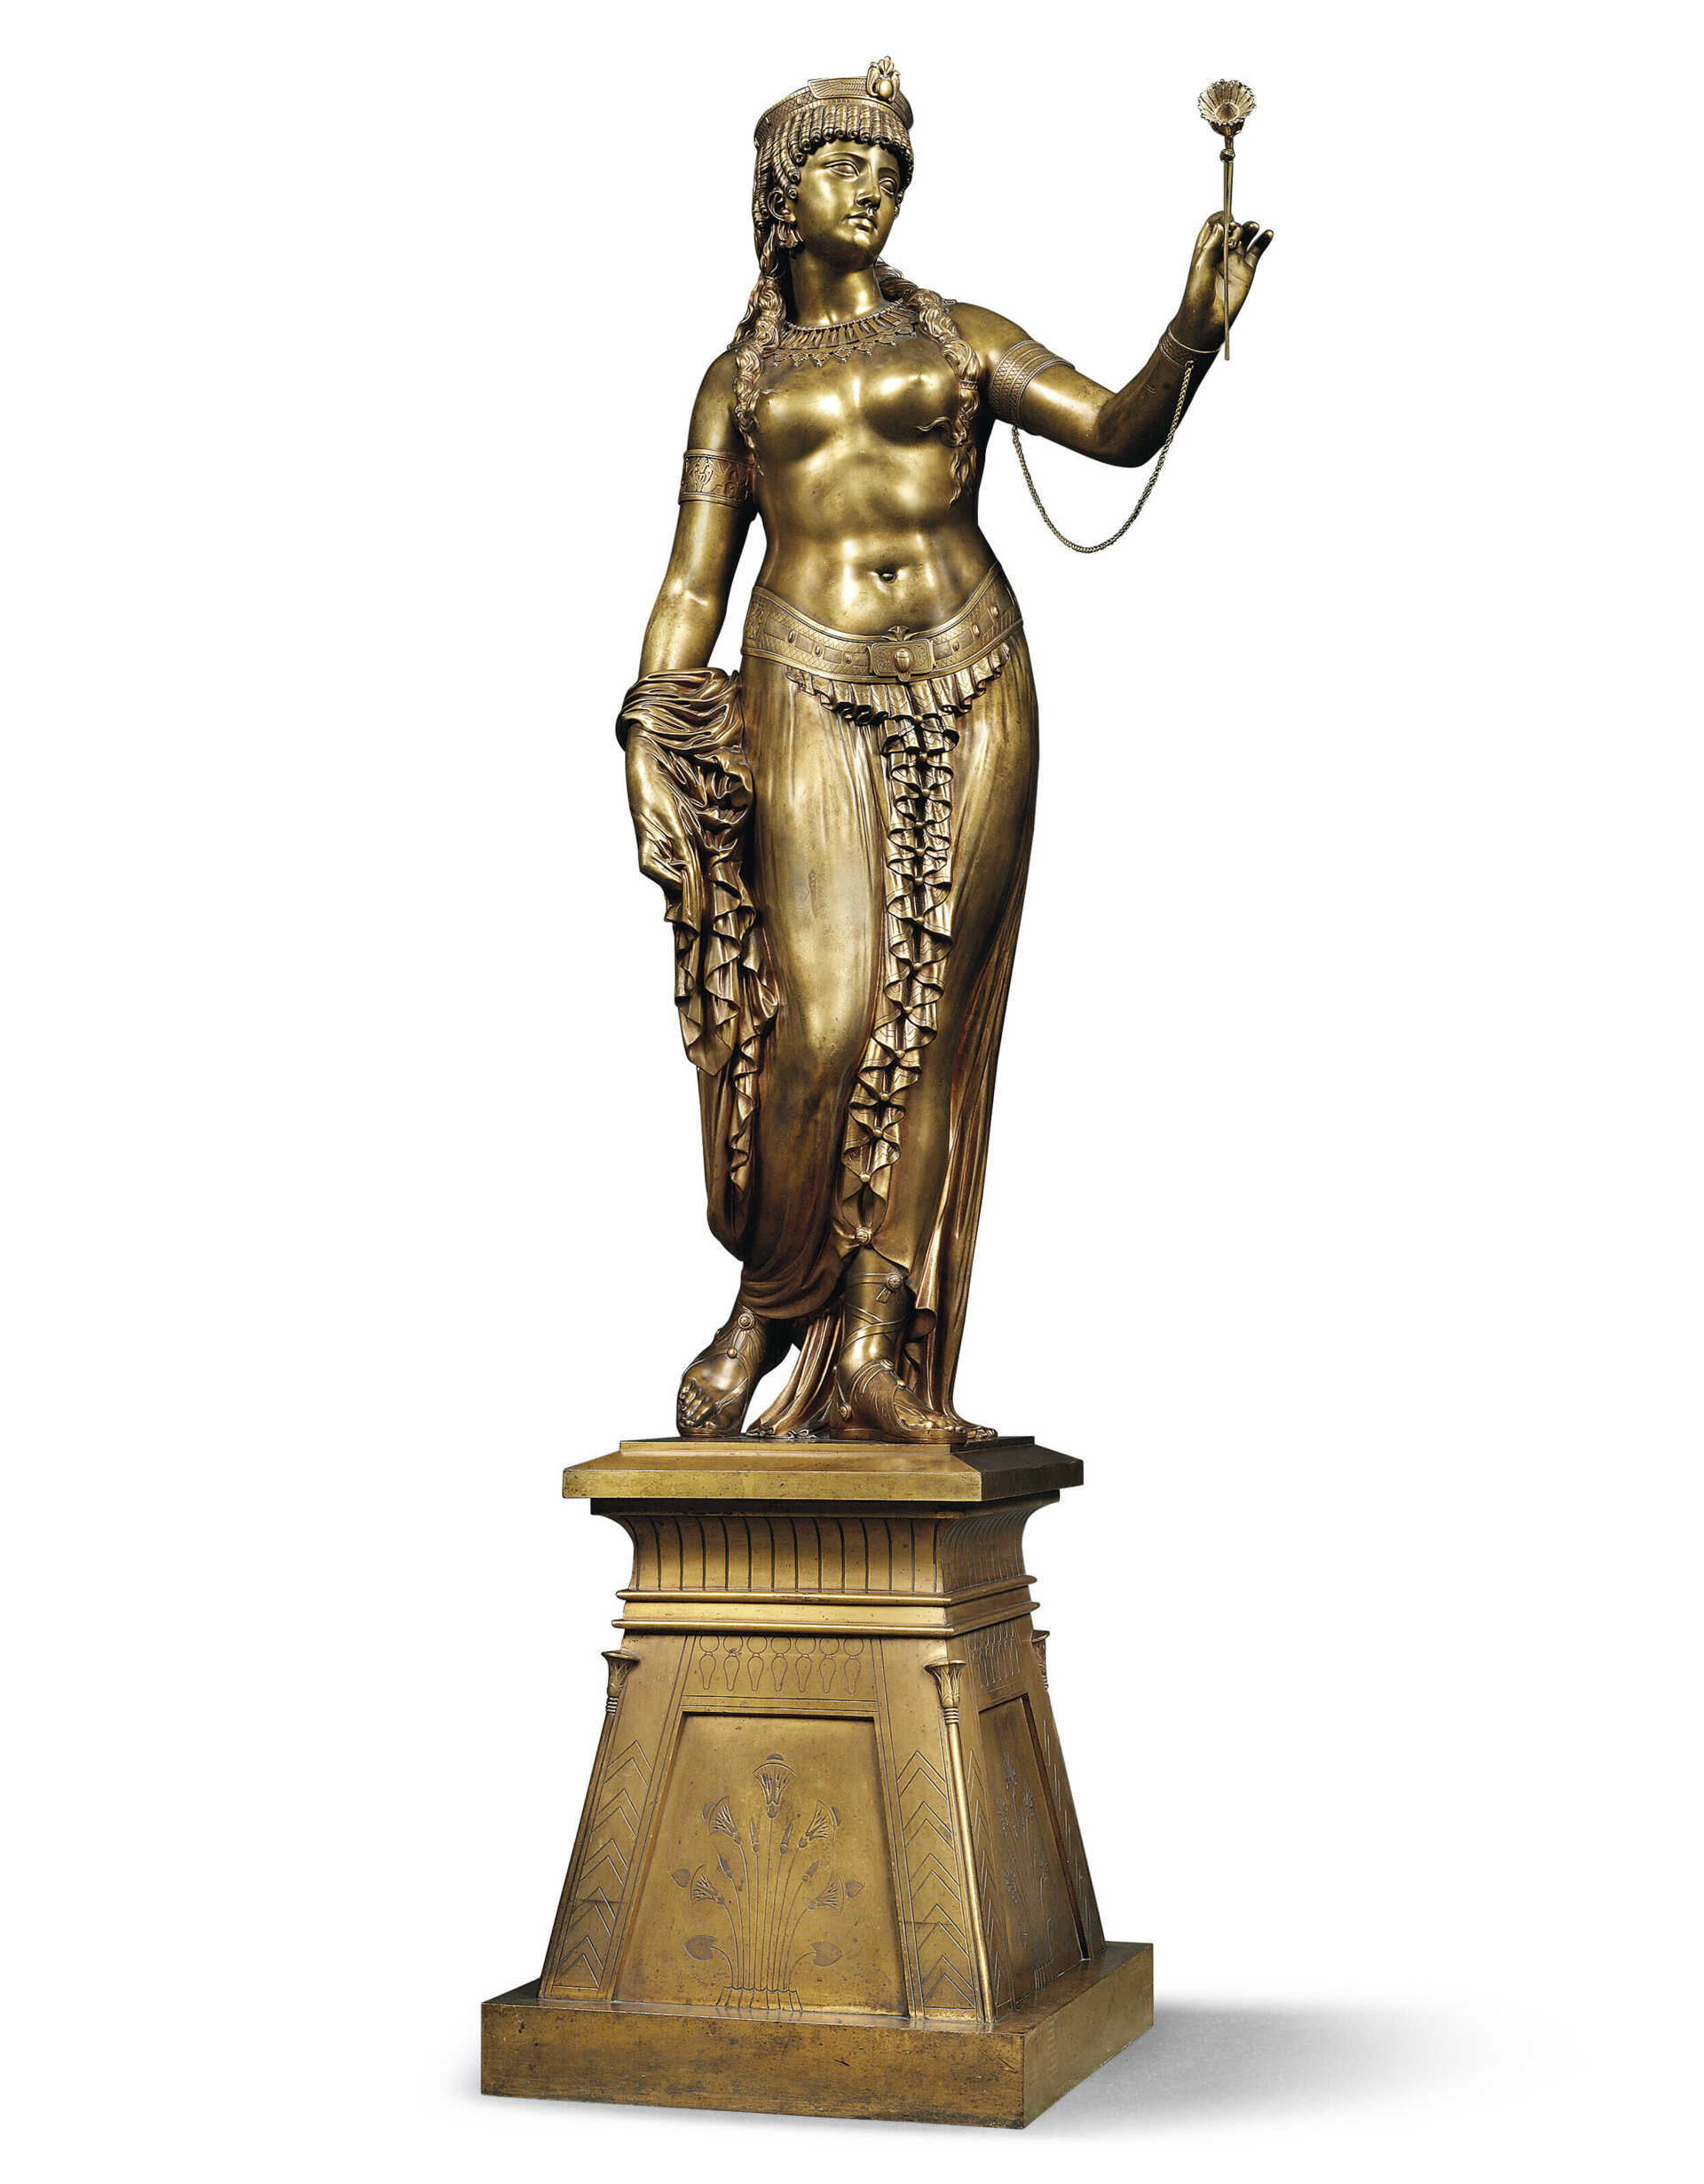 A FRENCH LIFE-SIZE GILT-BRONZE FIGURE OF CLEOPATRA, ENTITLED &#39;CLEOPATRE DEVANT CESAR&#39; (CLEOPATRA BEFORE CAESAR)